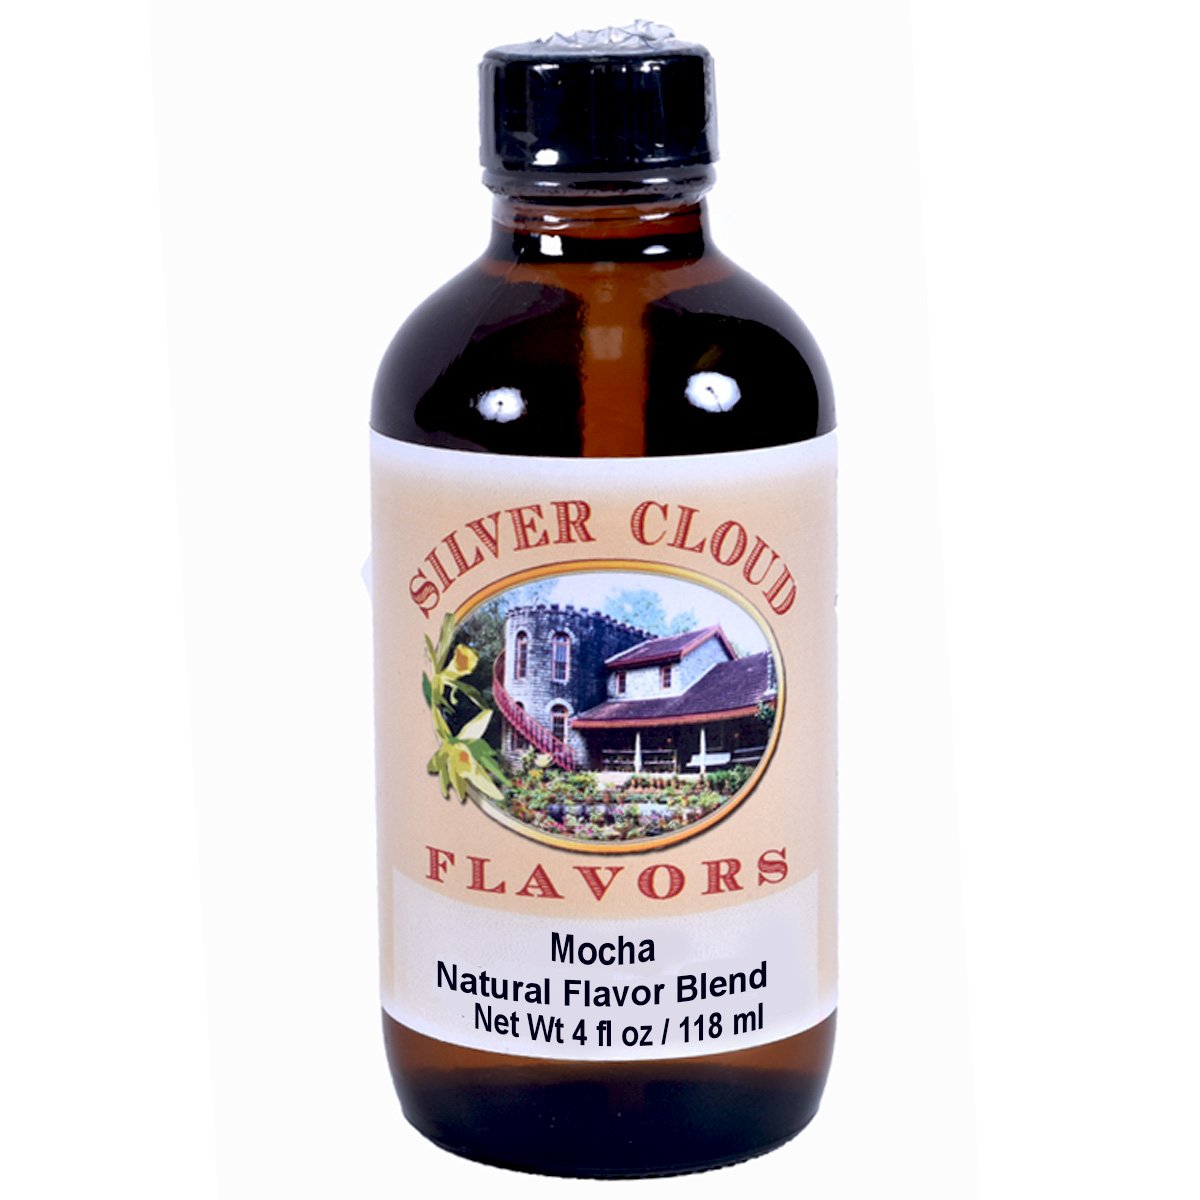 Mocha, Natural Flavor Blend Silver Cloud Extract - Bake Supply Plus